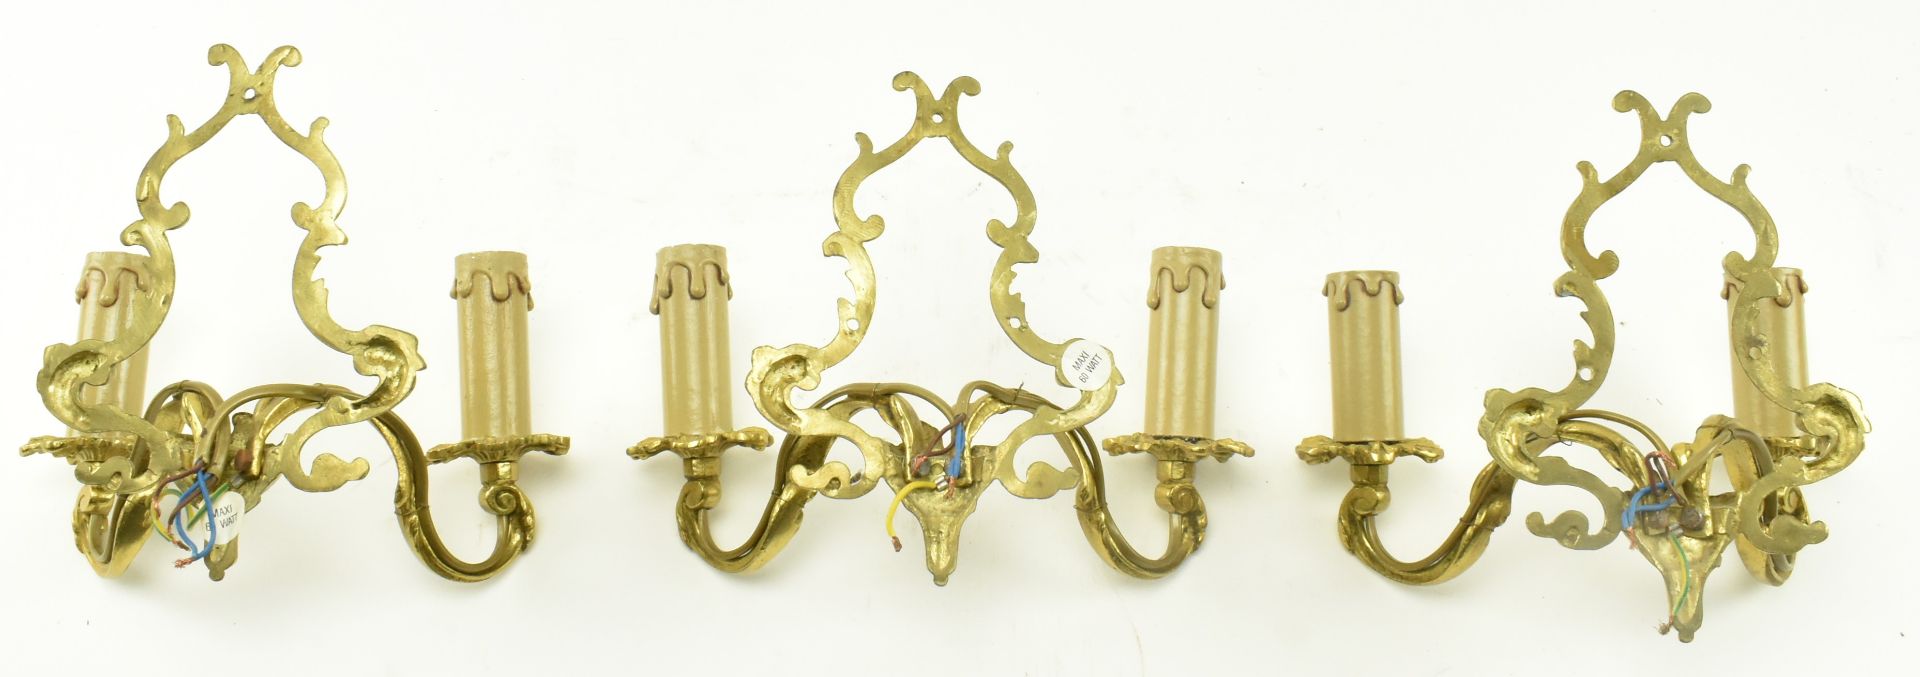 THREE FRENCH STYLE ROCOCO INSPIRED GILDED METAL WALL SCONCES - Image 5 of 5